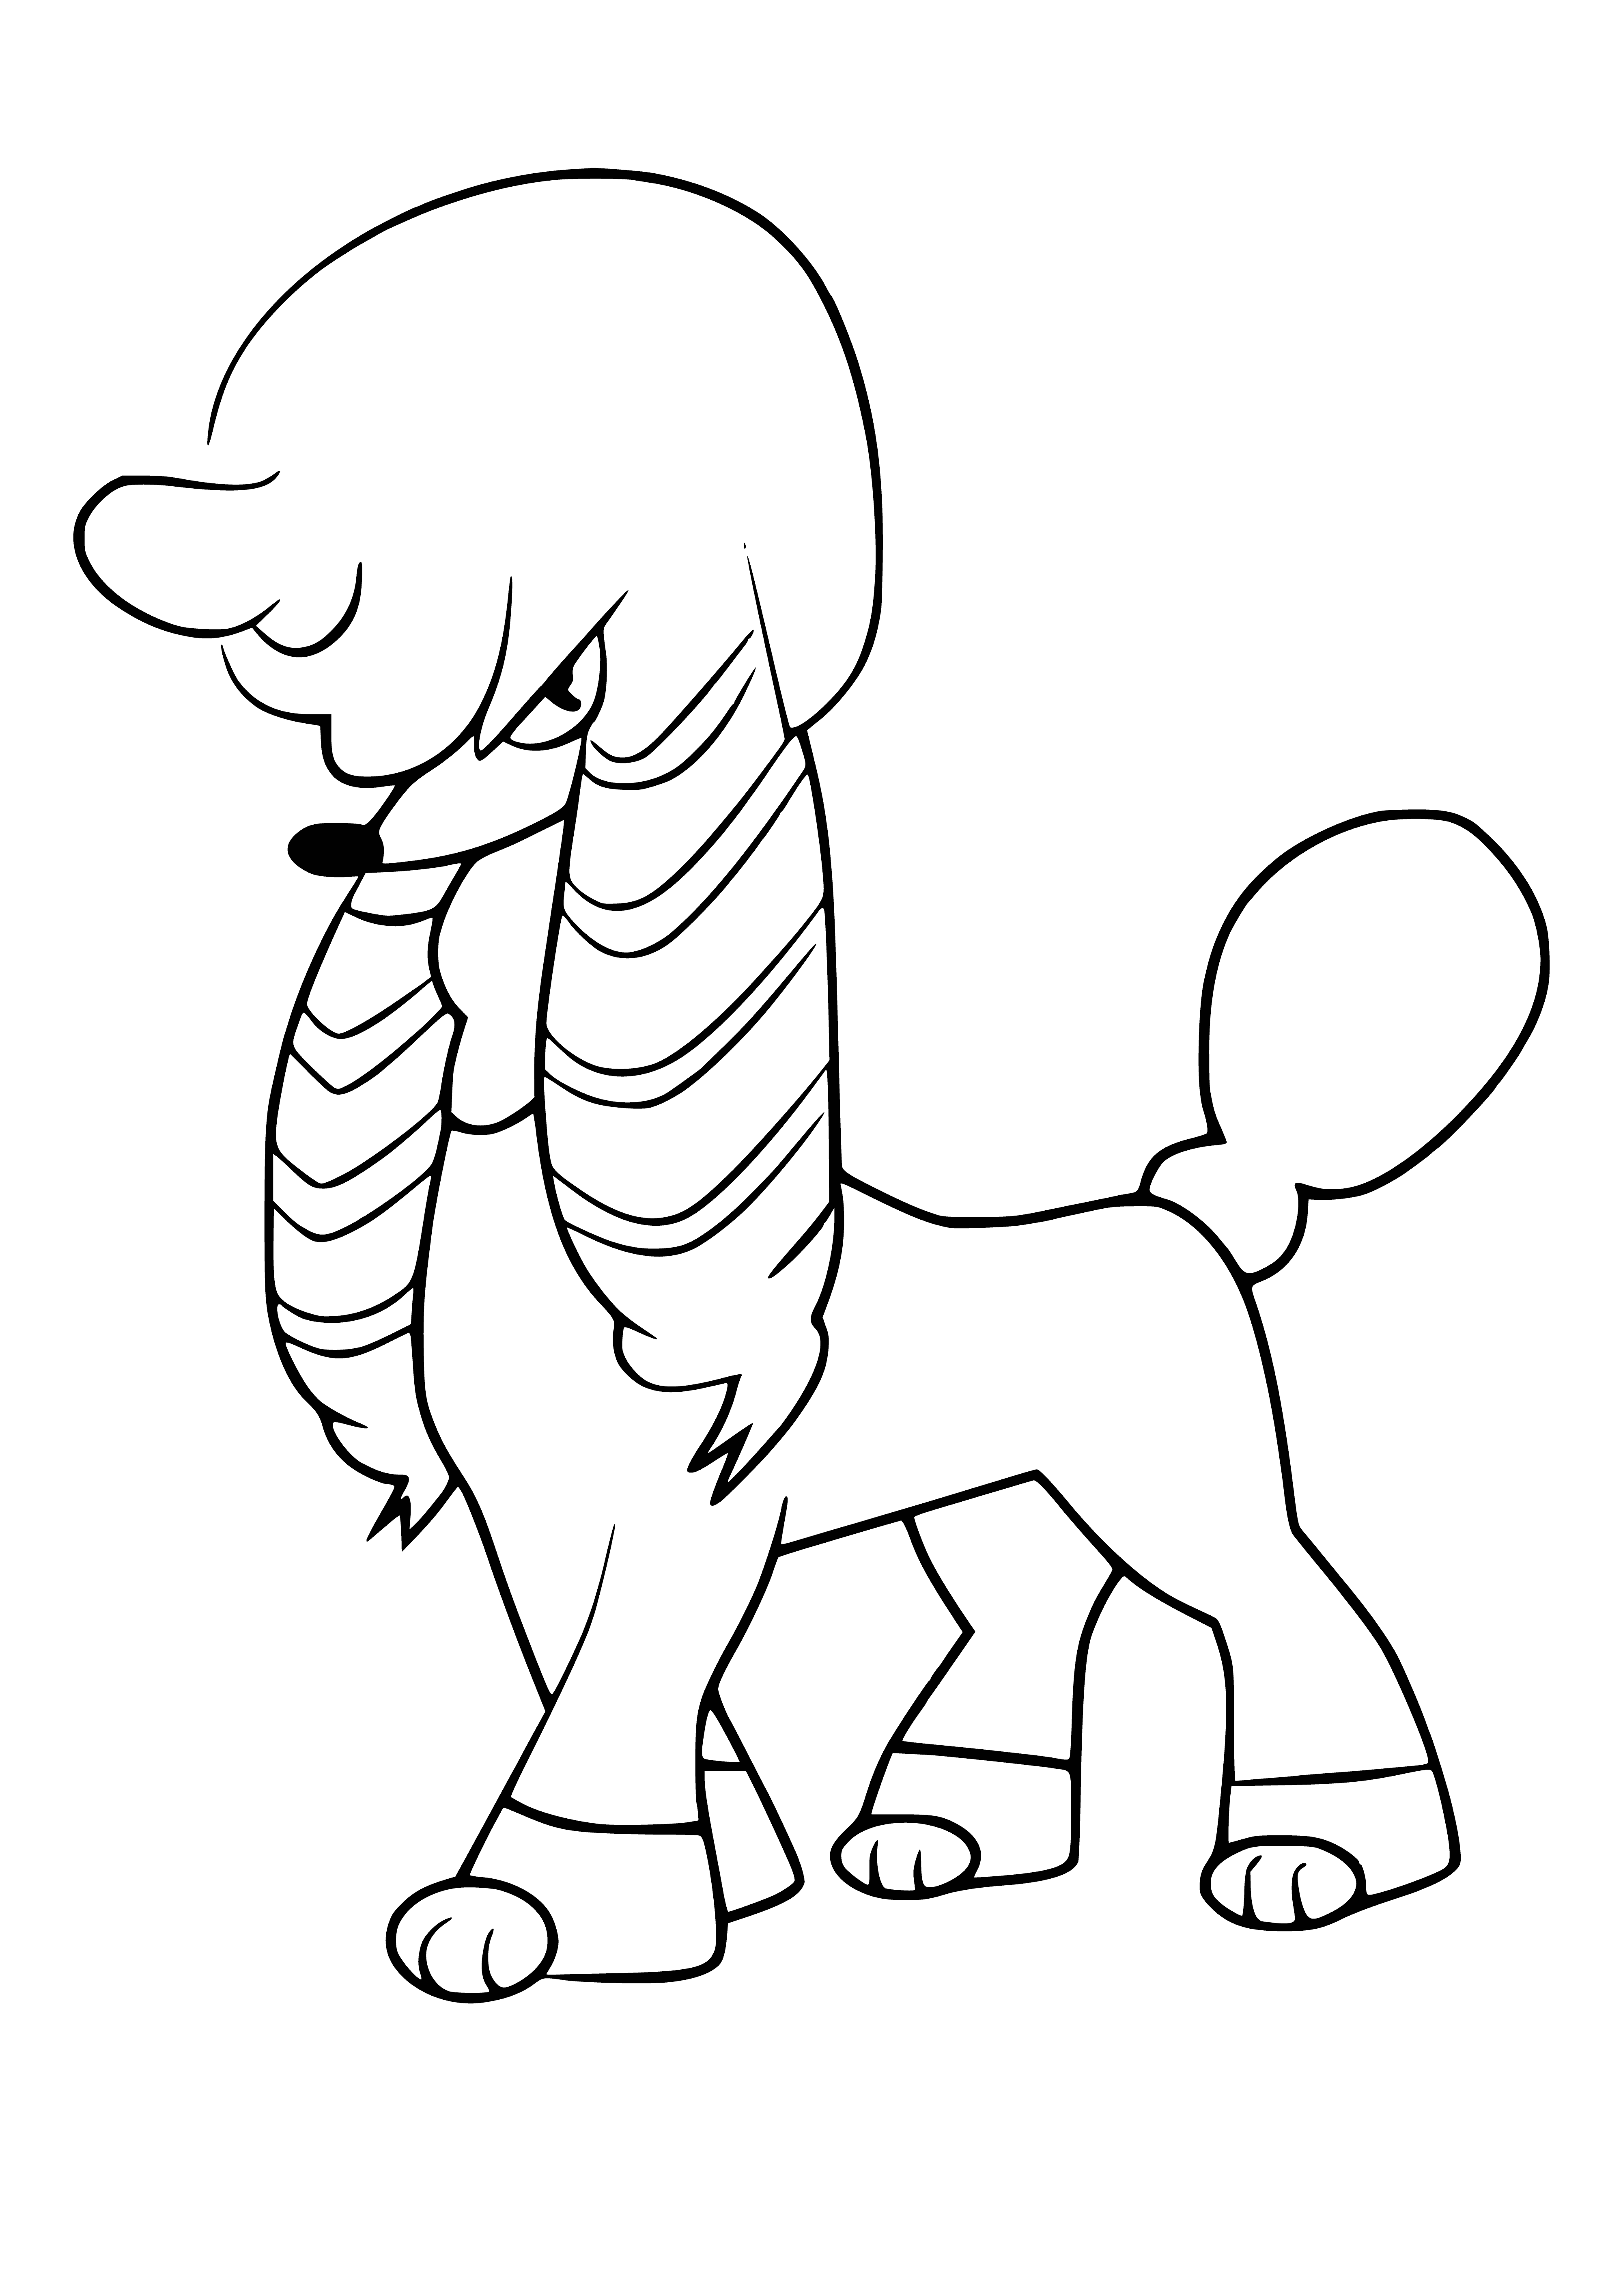 coloring page: Pokémon Furfrou is regal & elegant w/ beautiful fur, a dramatic 'queen' style & fiercely loyal to its trainer.